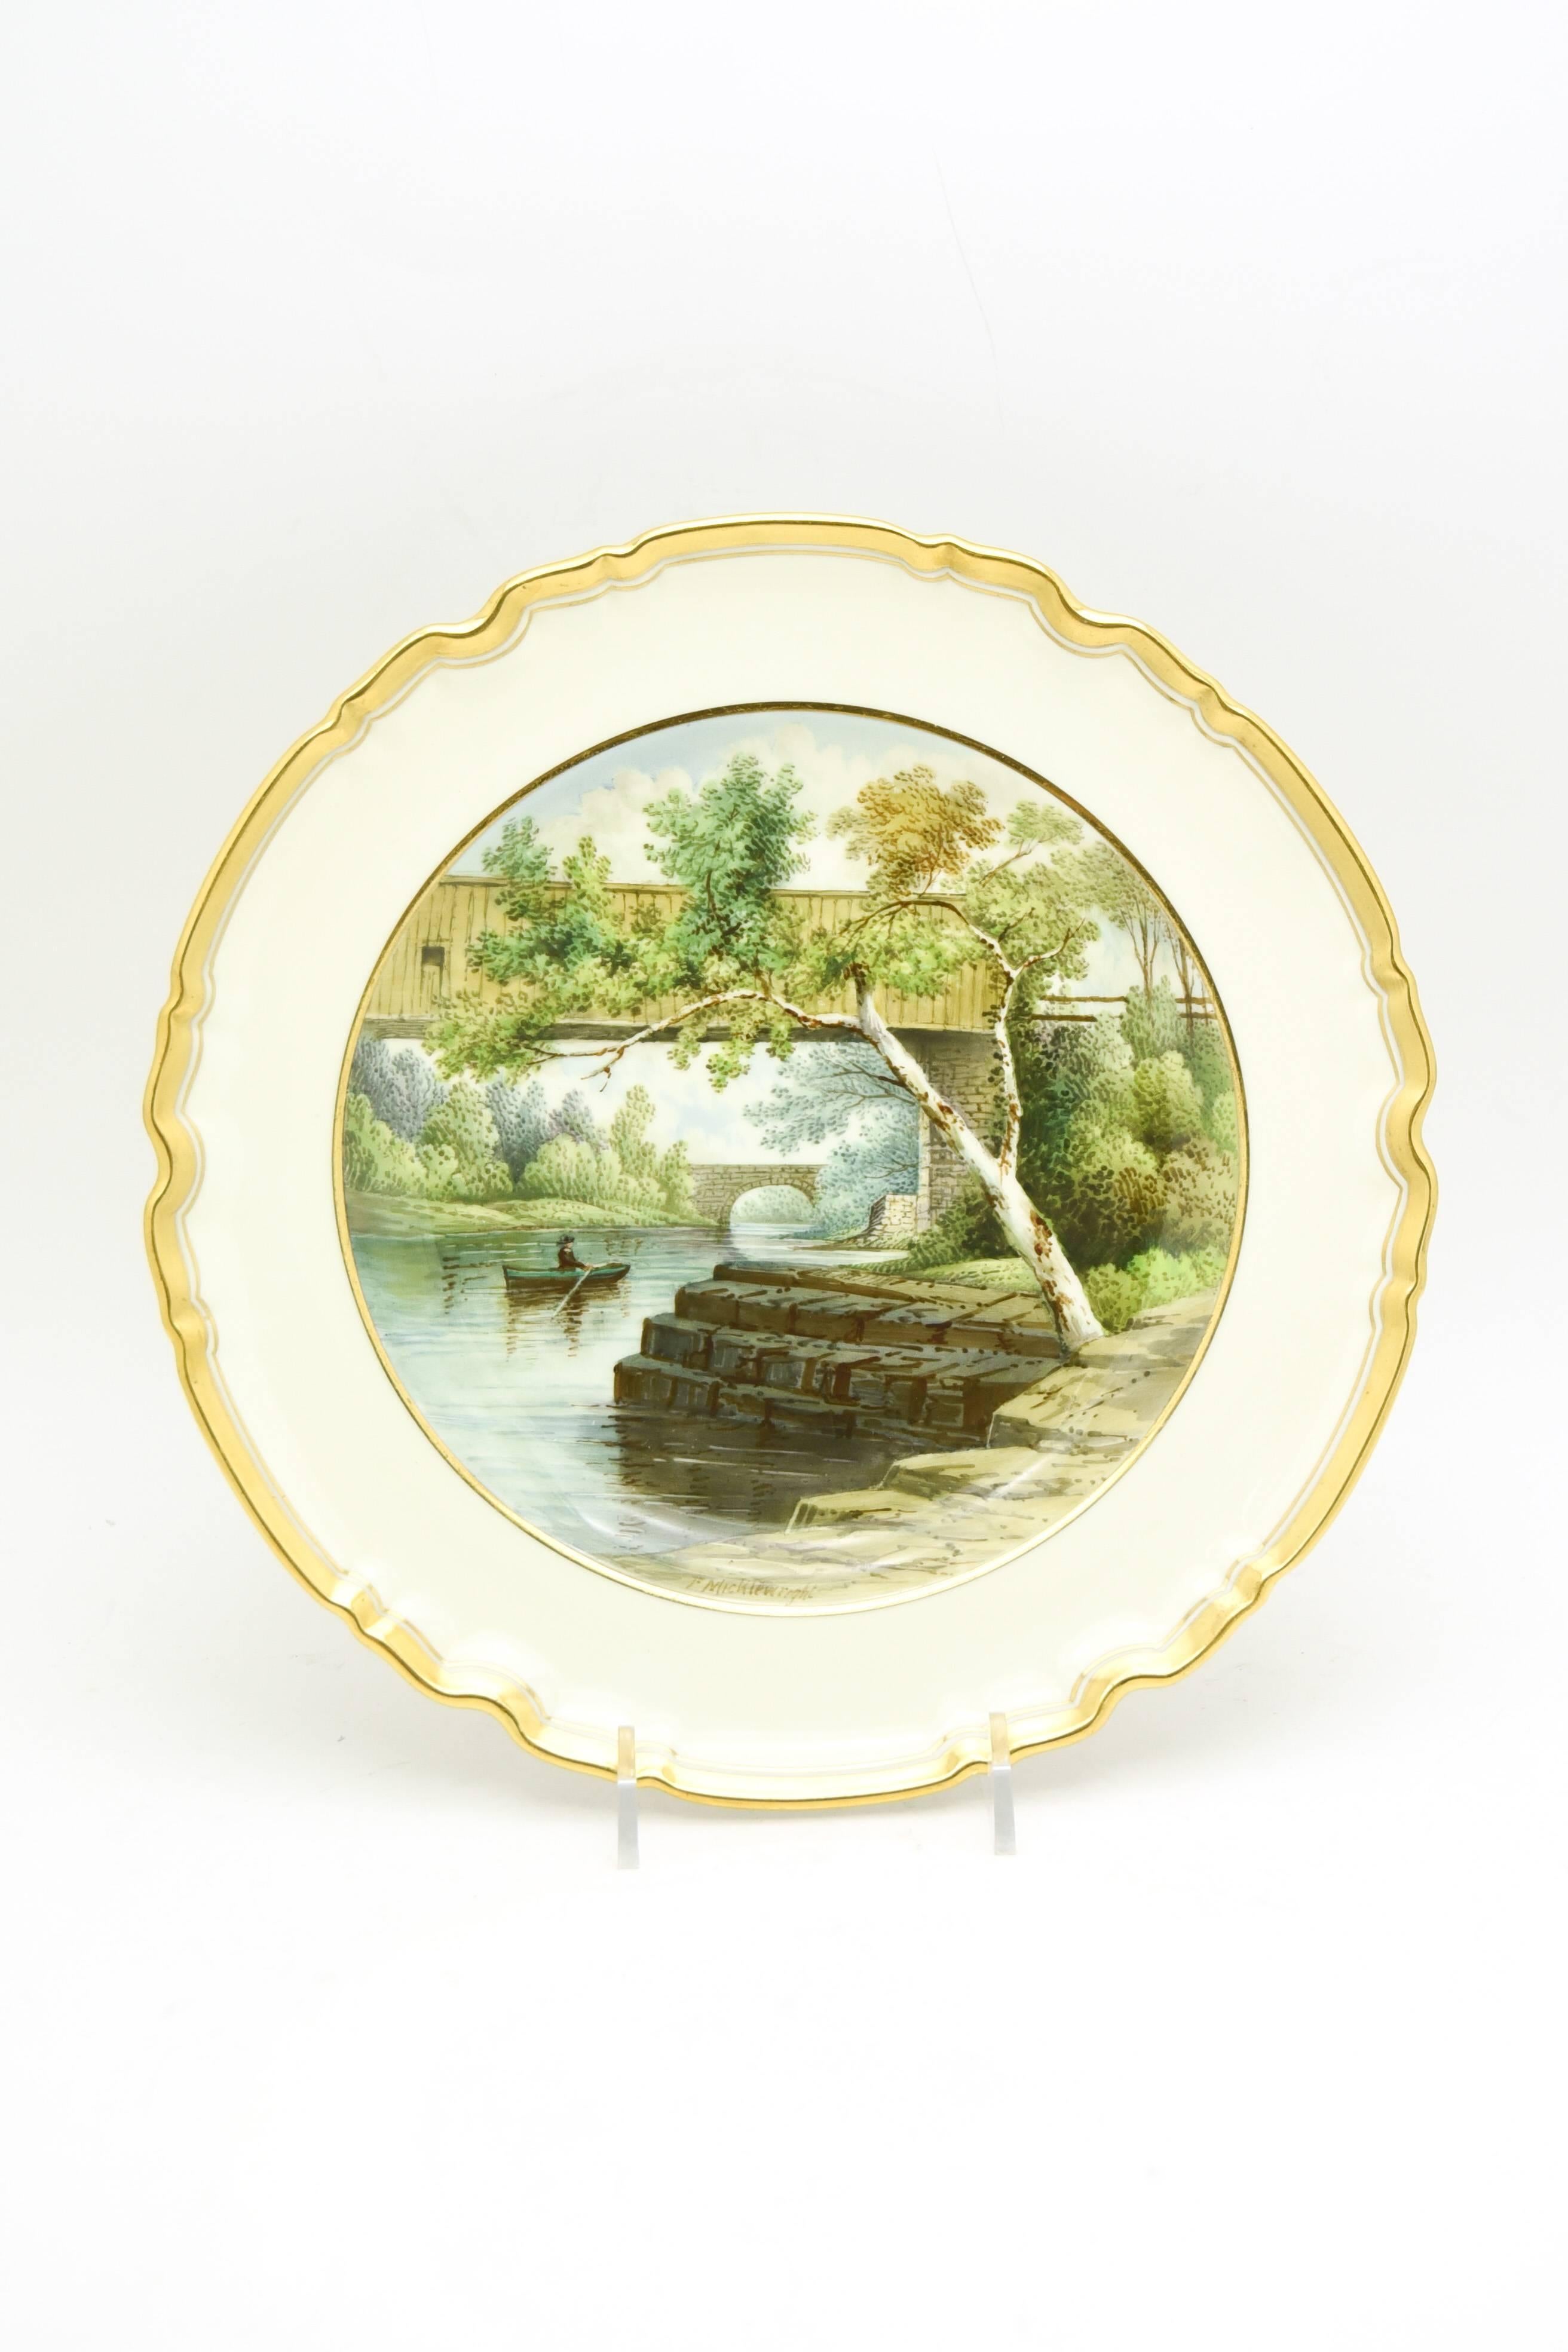 Hand-Painted 12 Copeland Spode Hand Painted Historic Fresh Water Cabinet/Dessert Plates For Sale